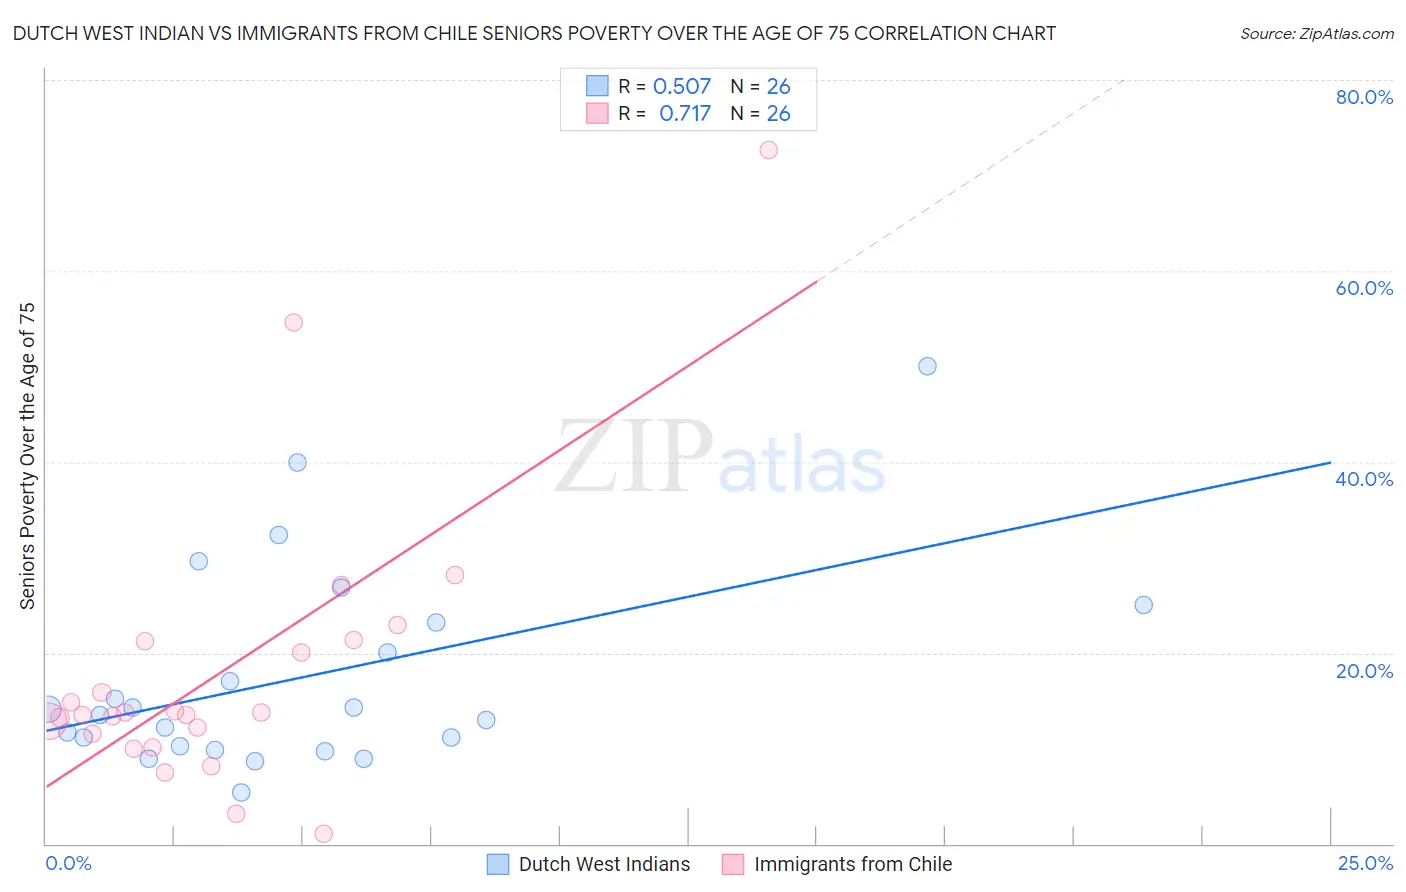 Dutch West Indian vs Immigrants from Chile Seniors Poverty Over the Age of 75